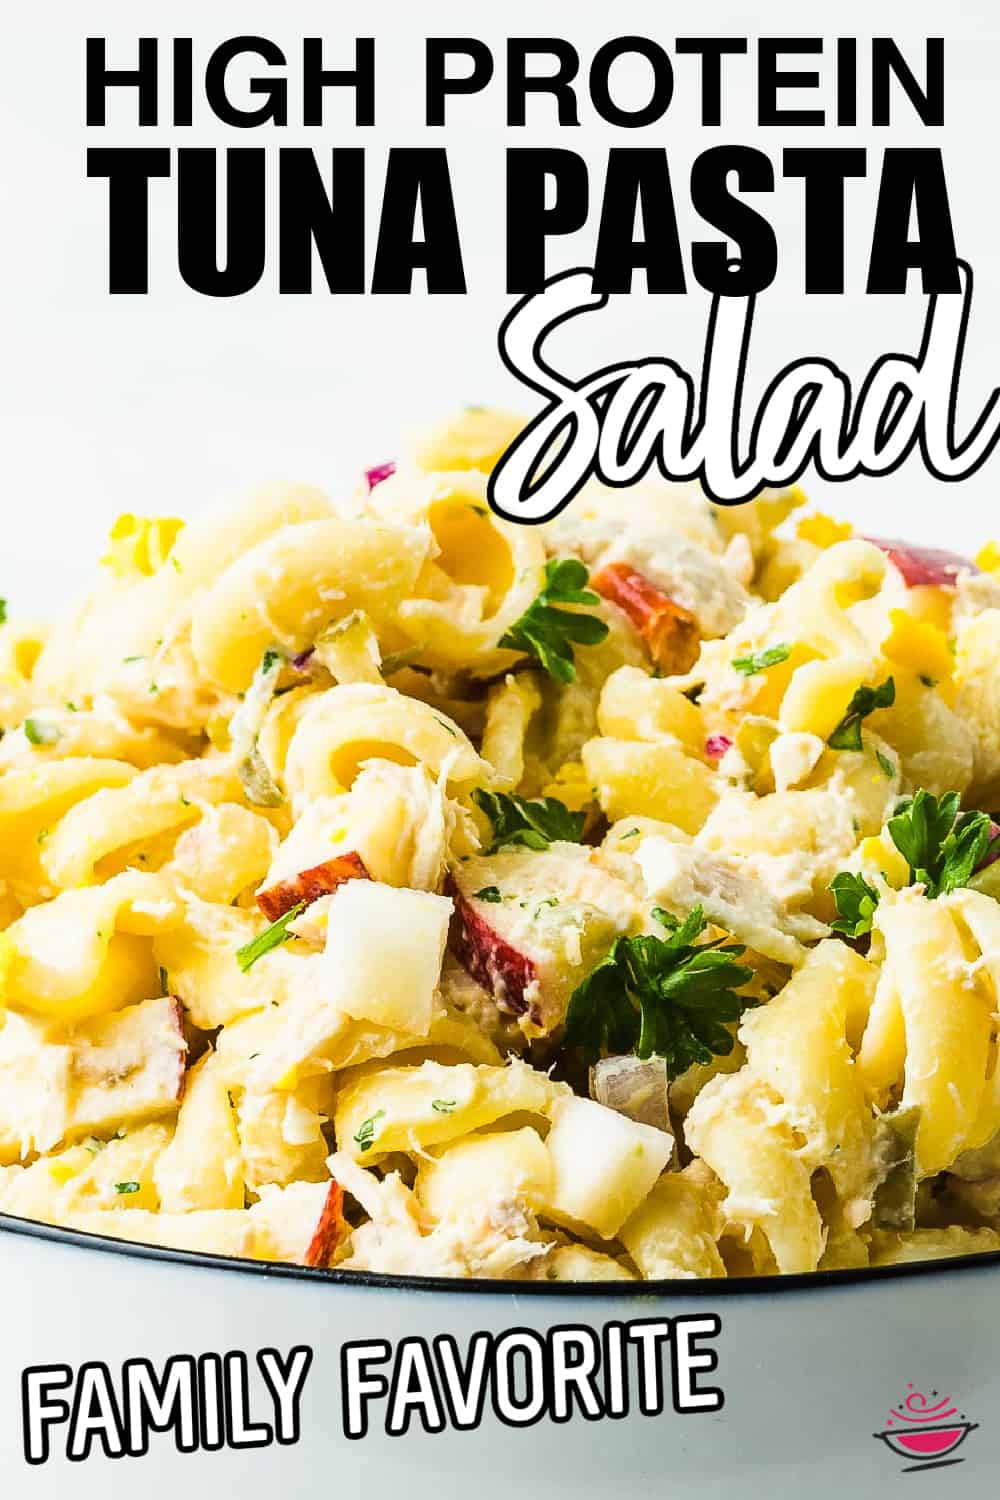 Tuna Pasta Salad - Perfect lunch salad that you can prep the day before. Sweet and savory and full of protein! #cheerfulcook #tuna #tunapastasalad #easyrecipe #lunch @sidedish ♡ cheerfulcook.com via @cheerfulcook